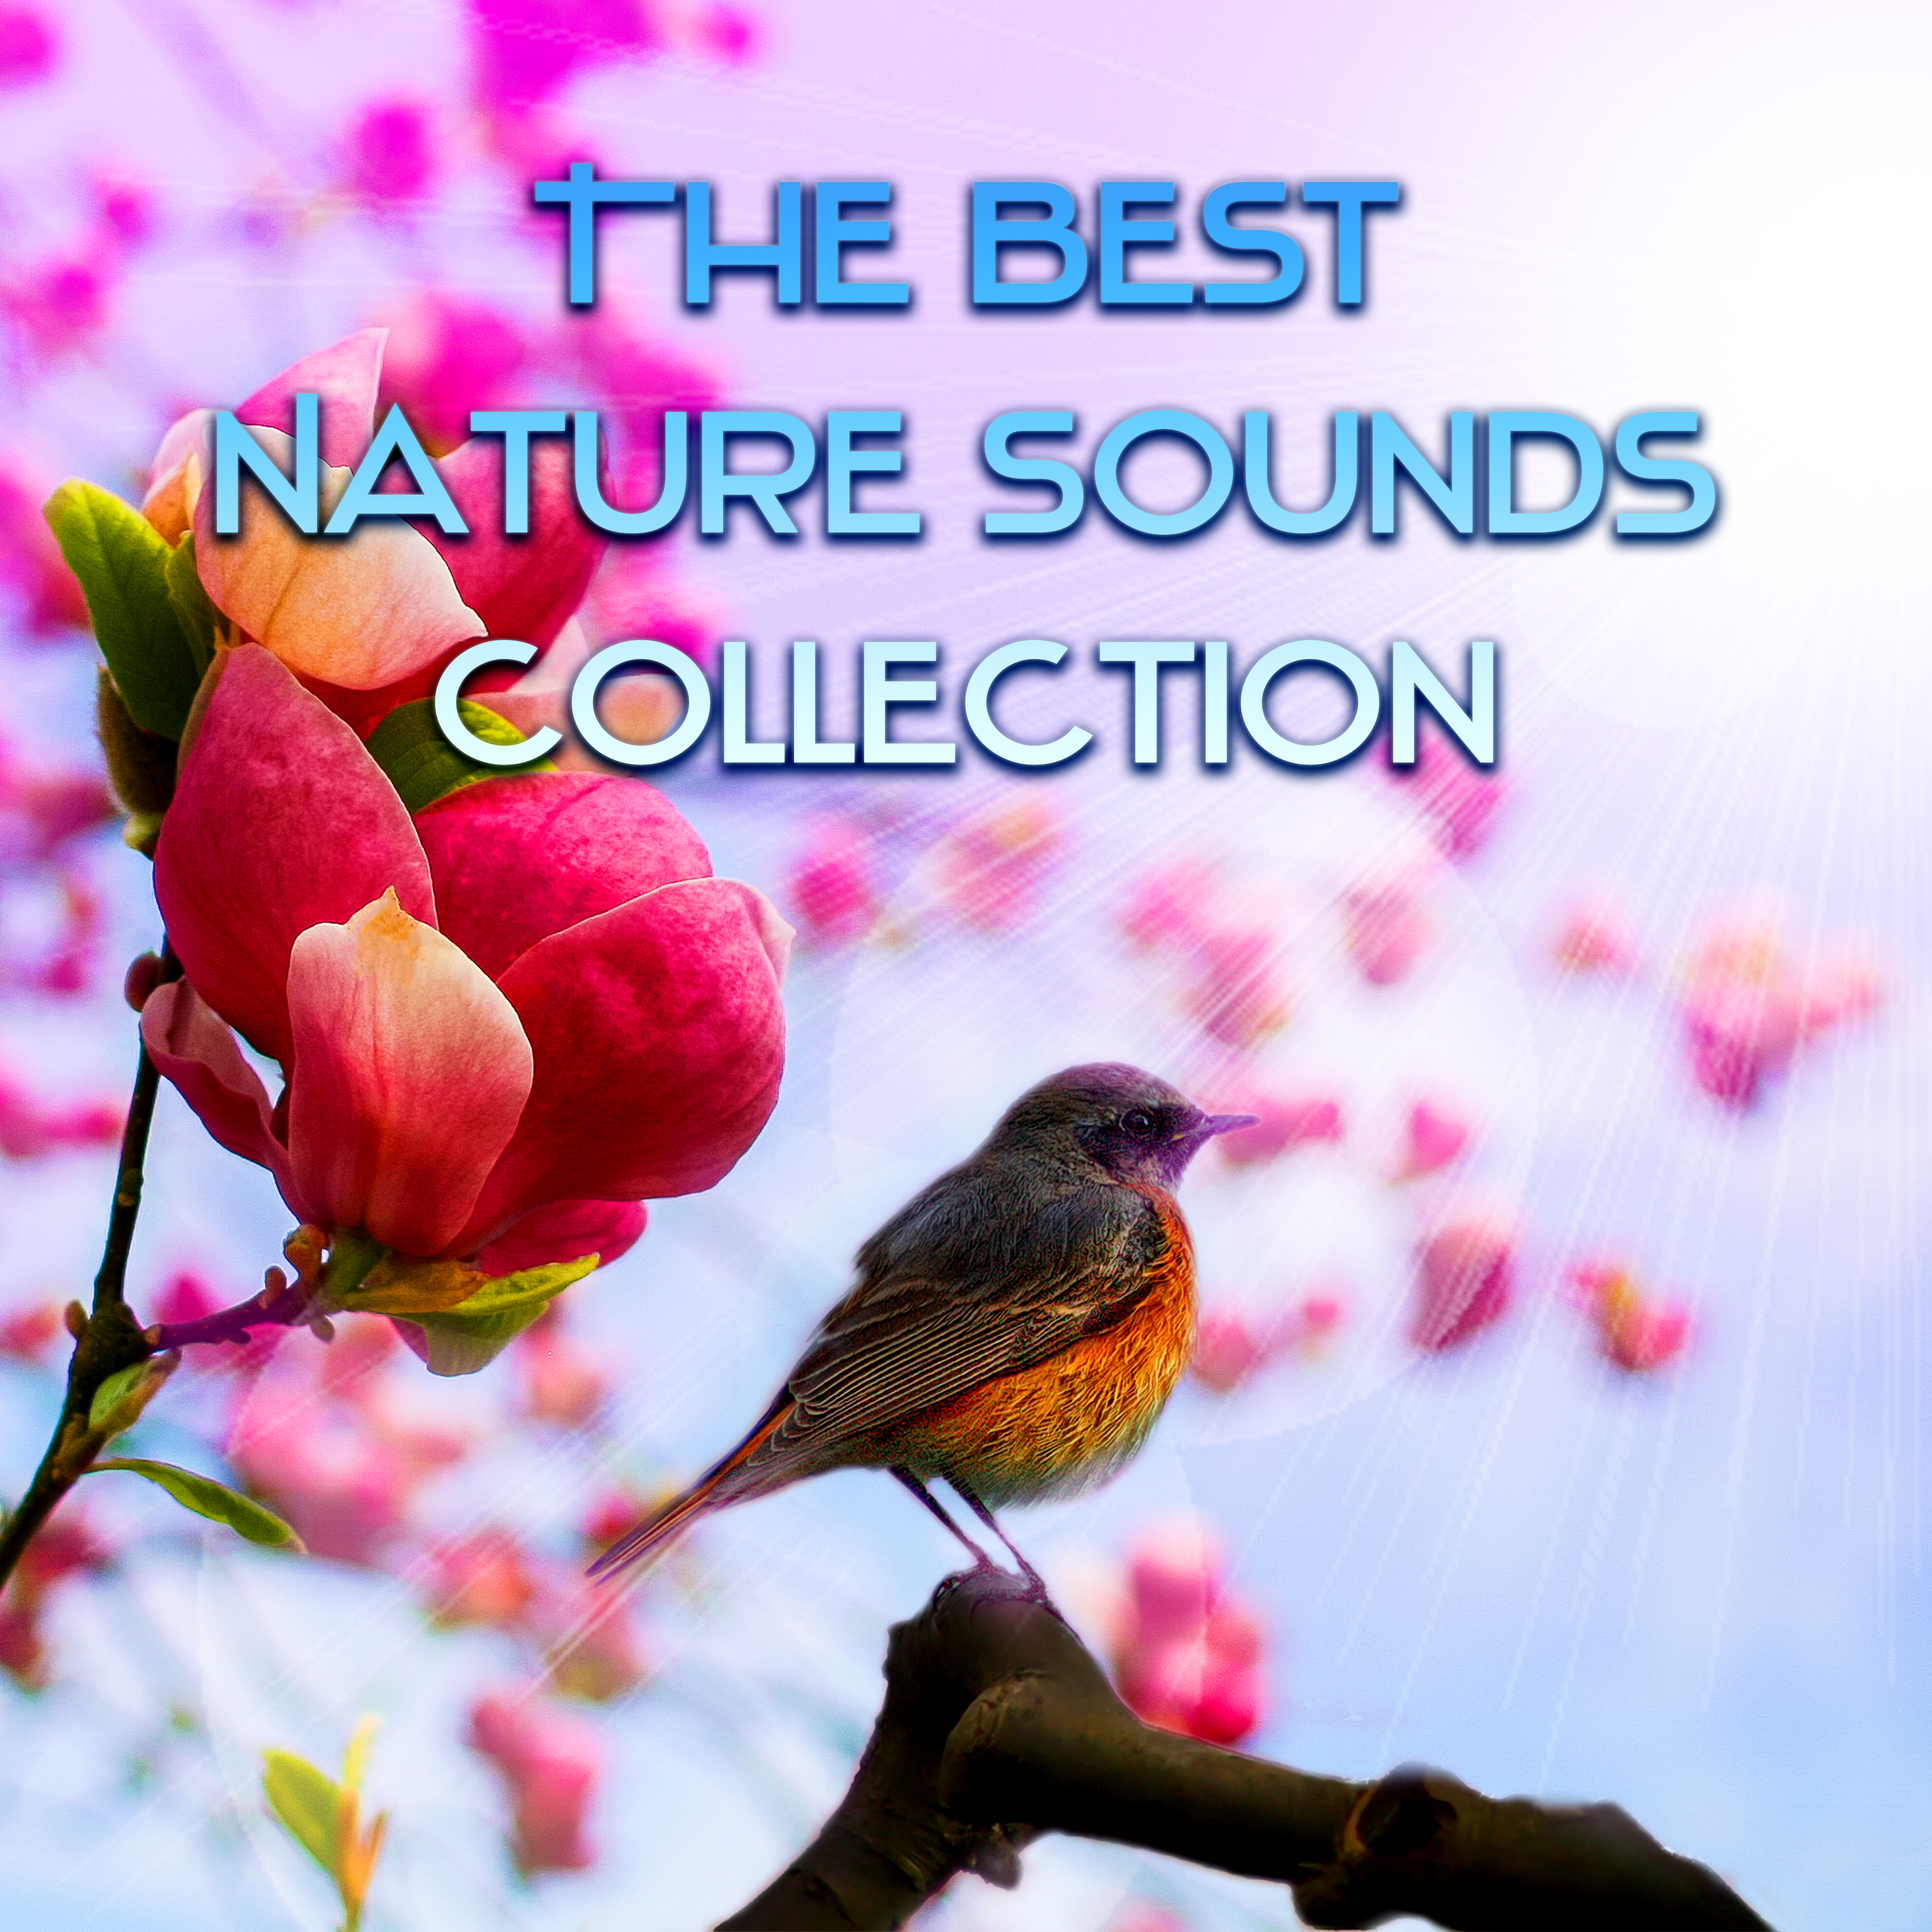 Tropical Birds and Ambient Music